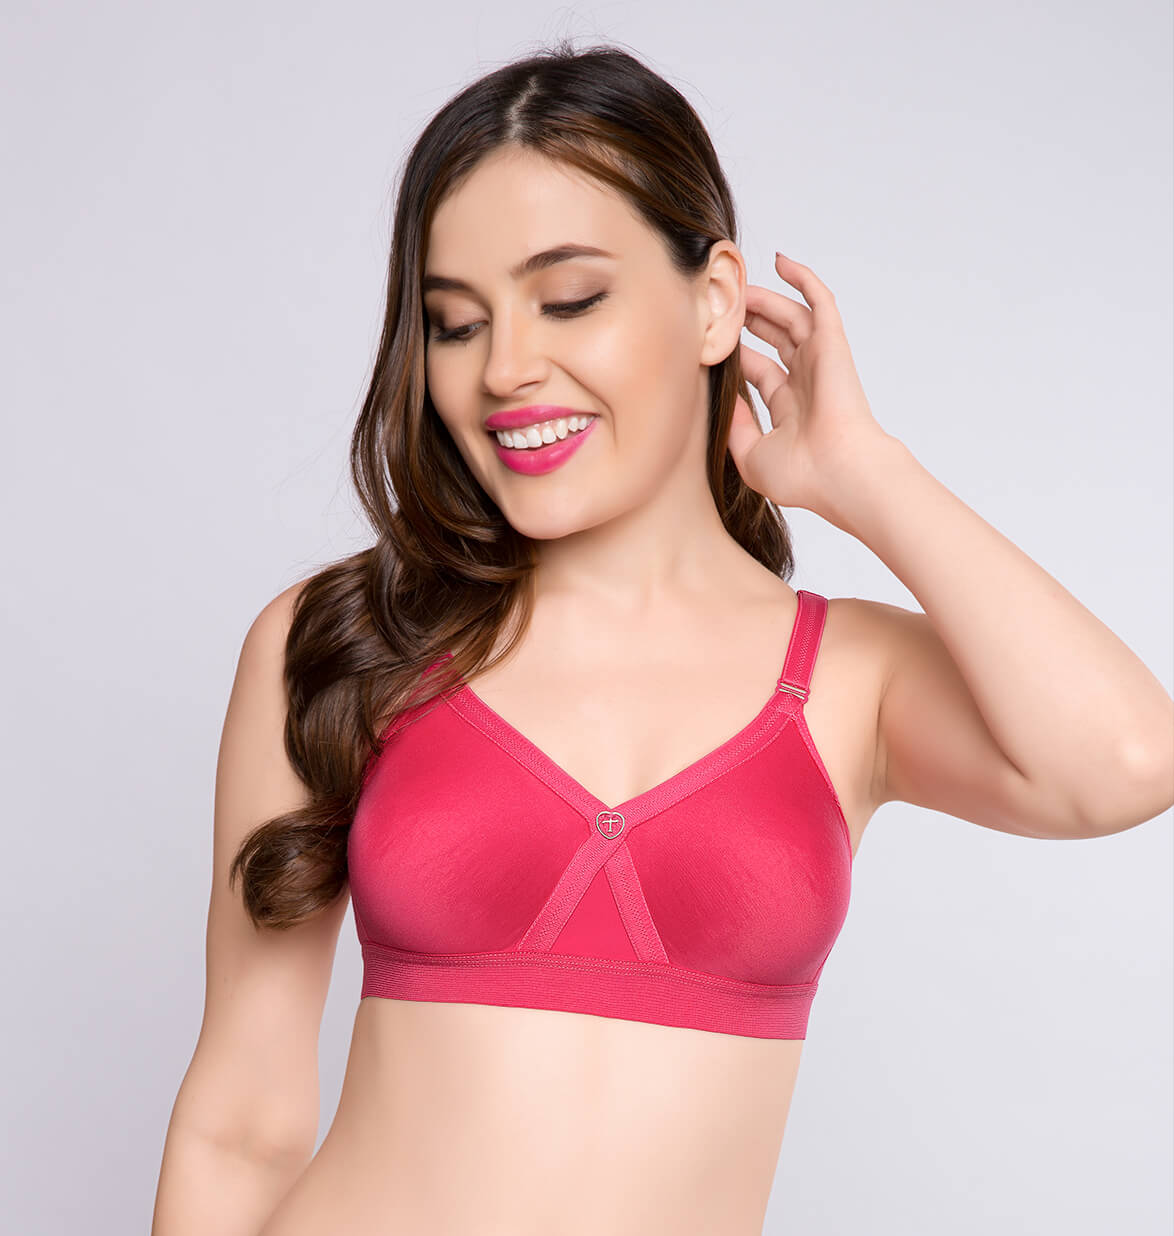 RIZA by TRYLO - Trylo Alpa is a specially designed bra for tight outfits.  It is seamless and ensures a right bust definition with its design. It will  surely help you rock